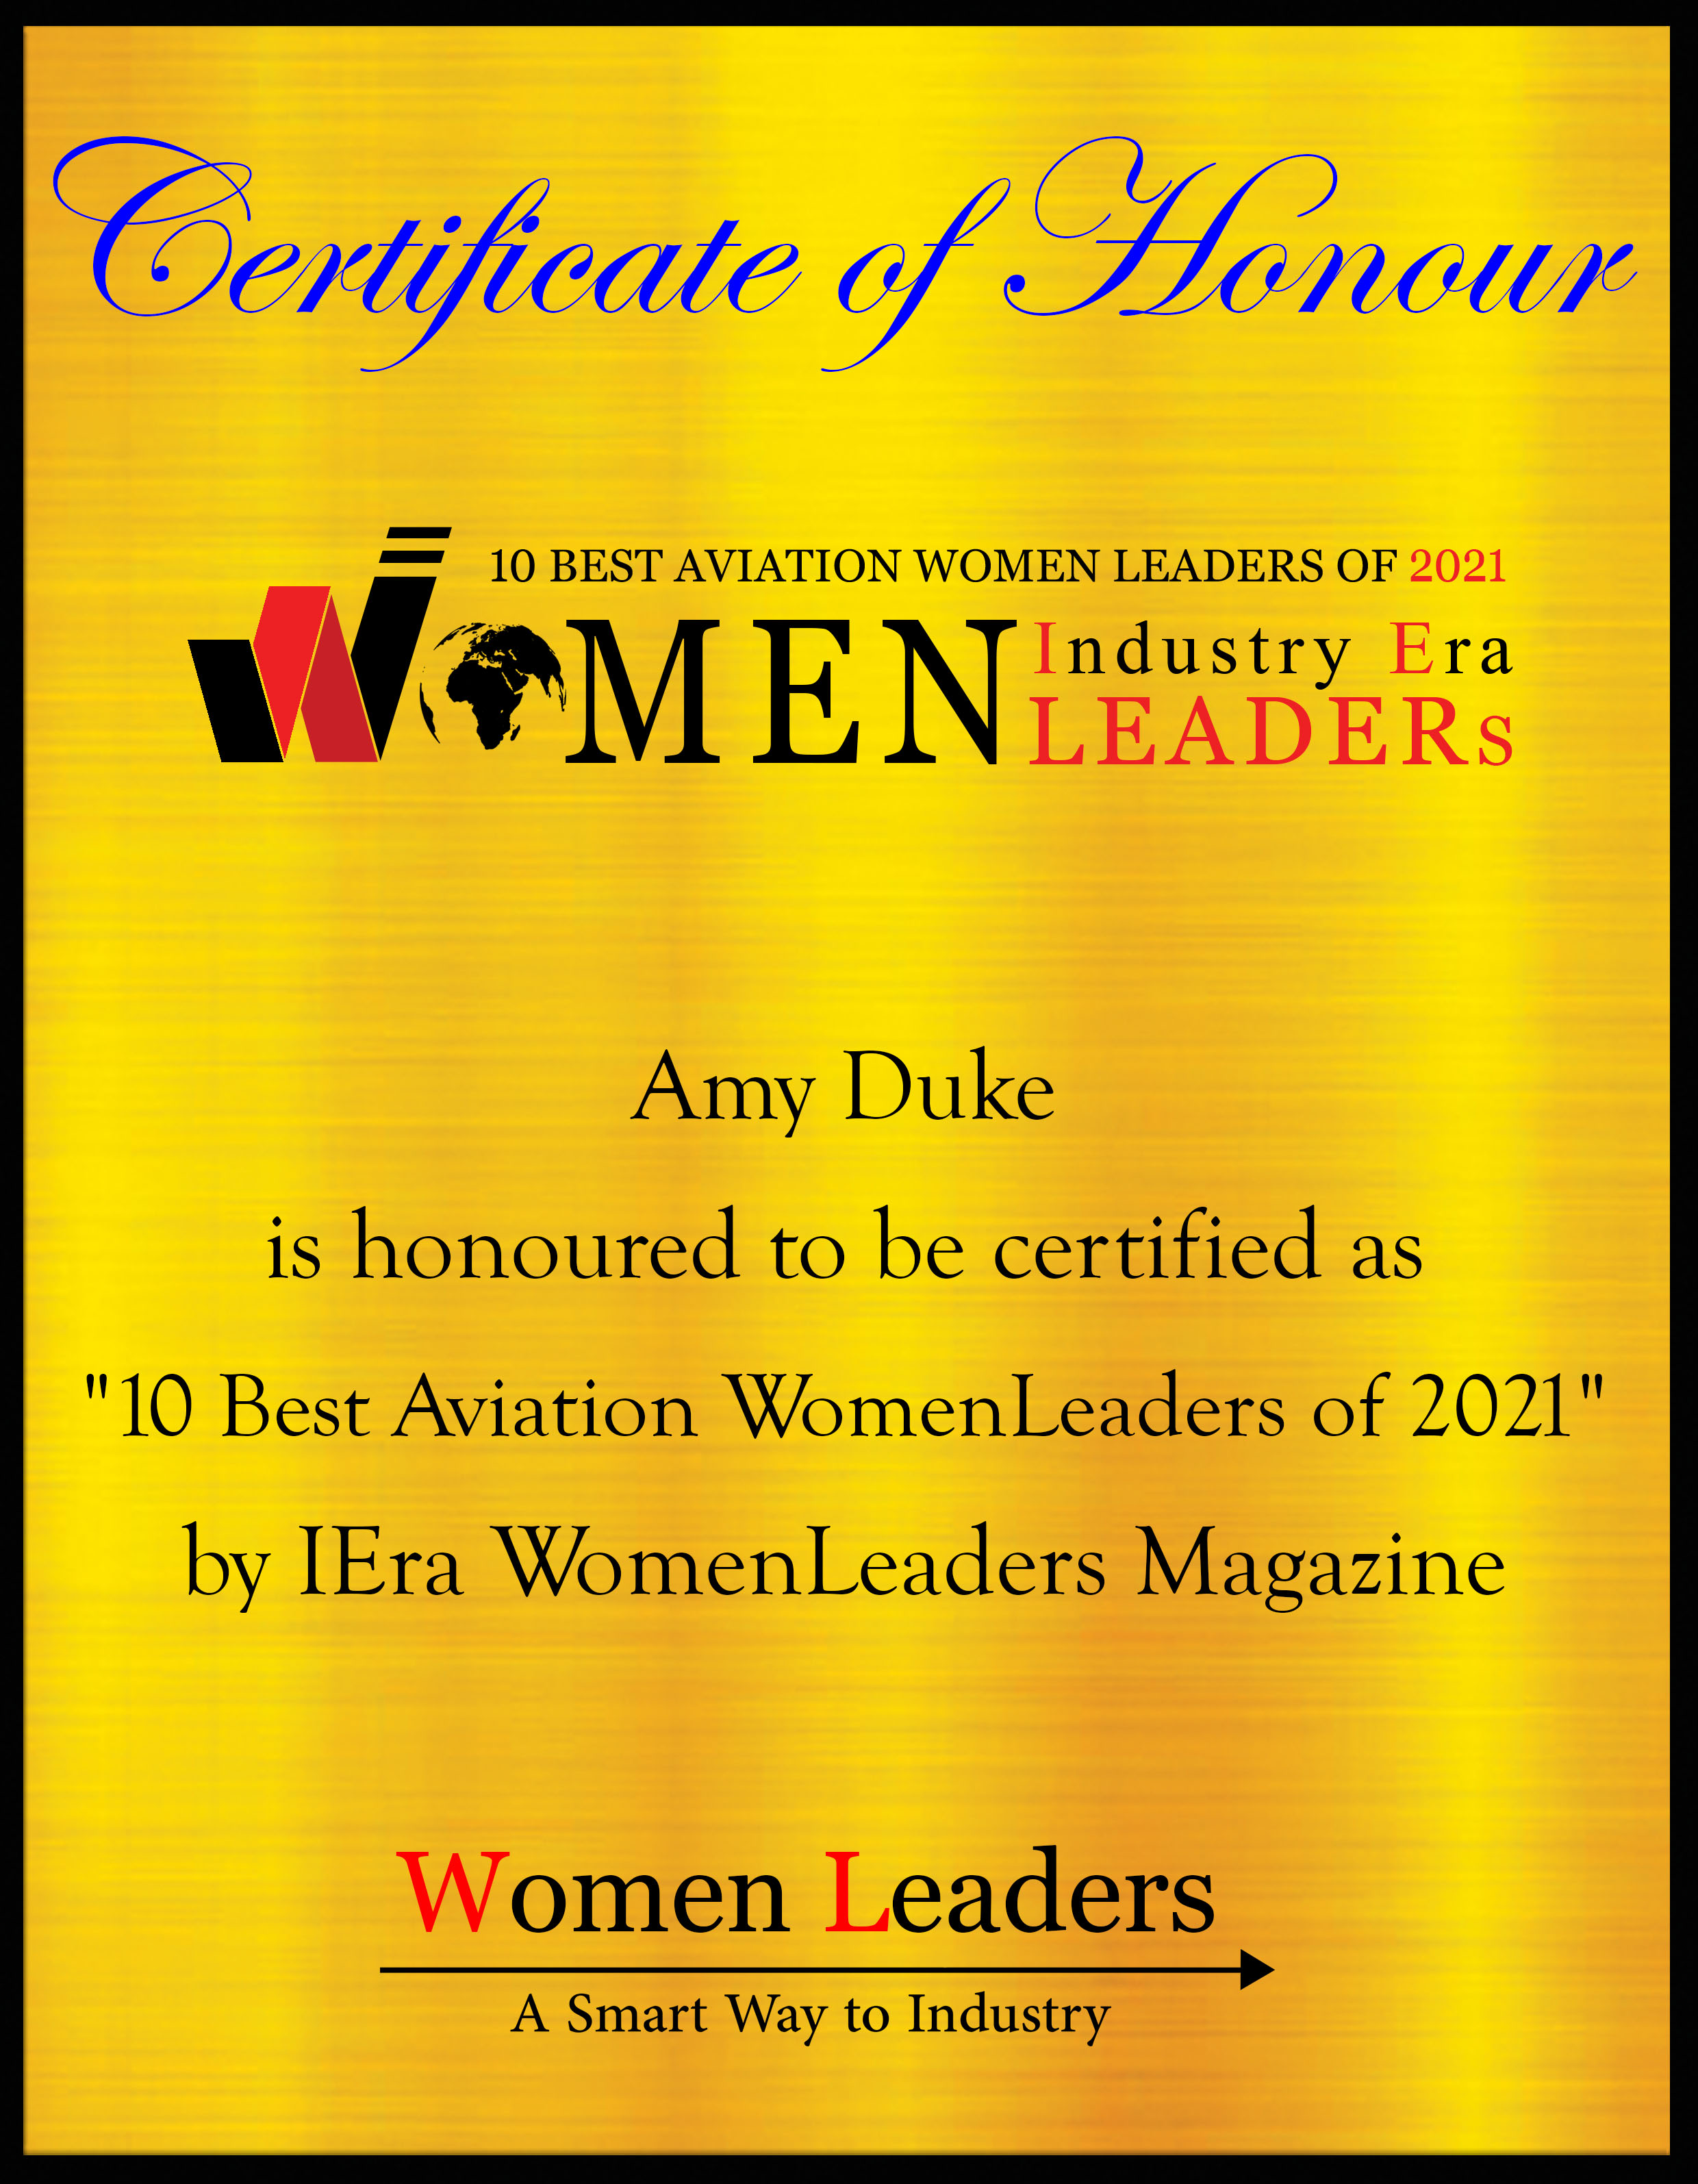 Amy Duke, Managing Director & Accountable Manager at Manhattan Aviation, Most Aviation WomenLeaders of 2021